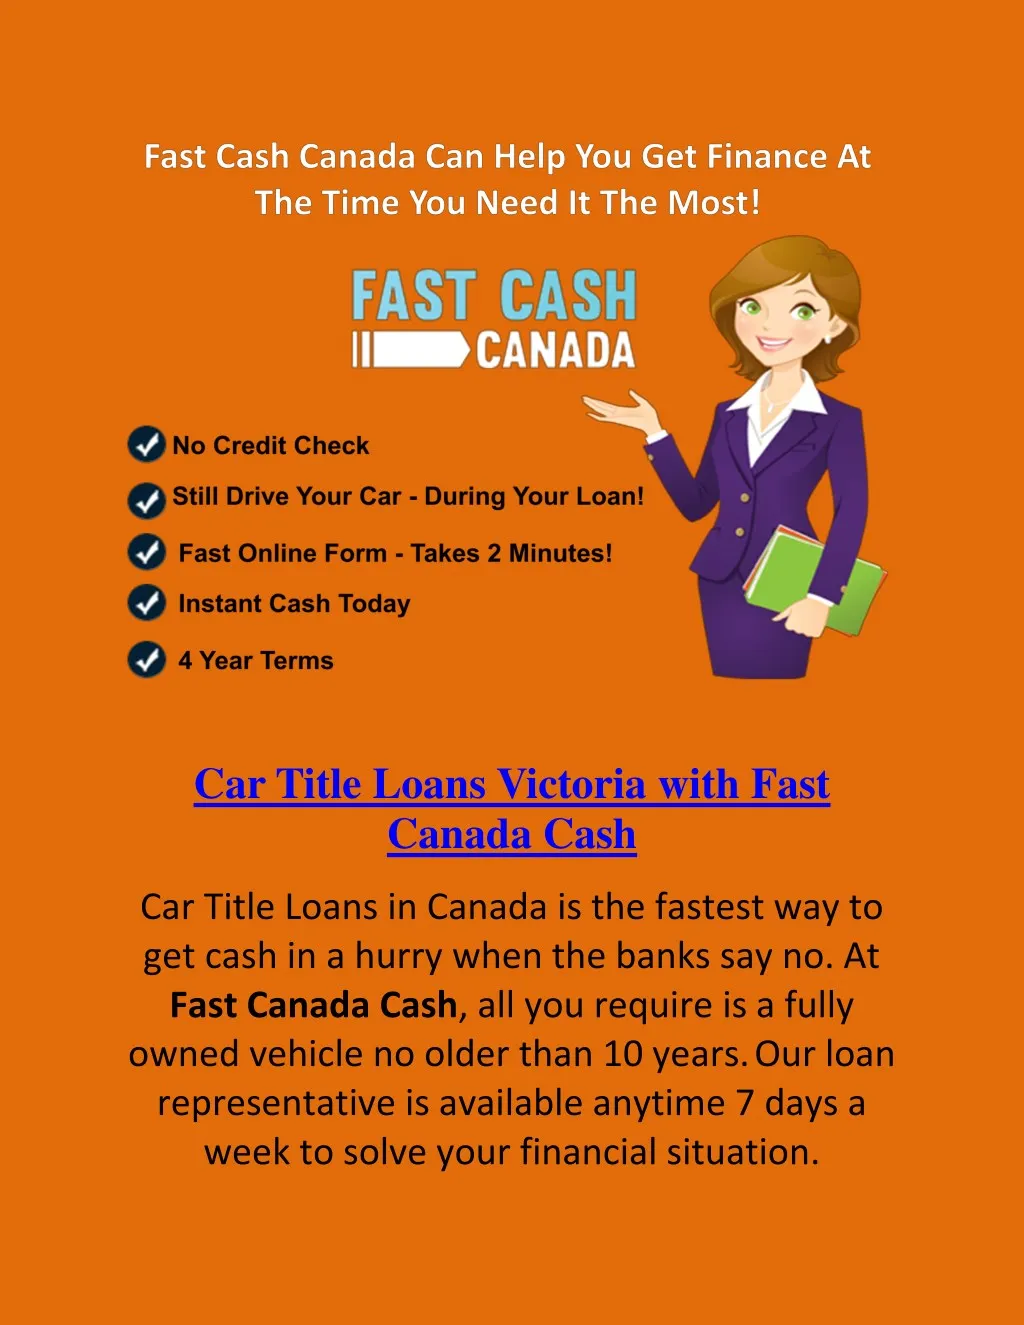 car title loans victoria with fast canada cash